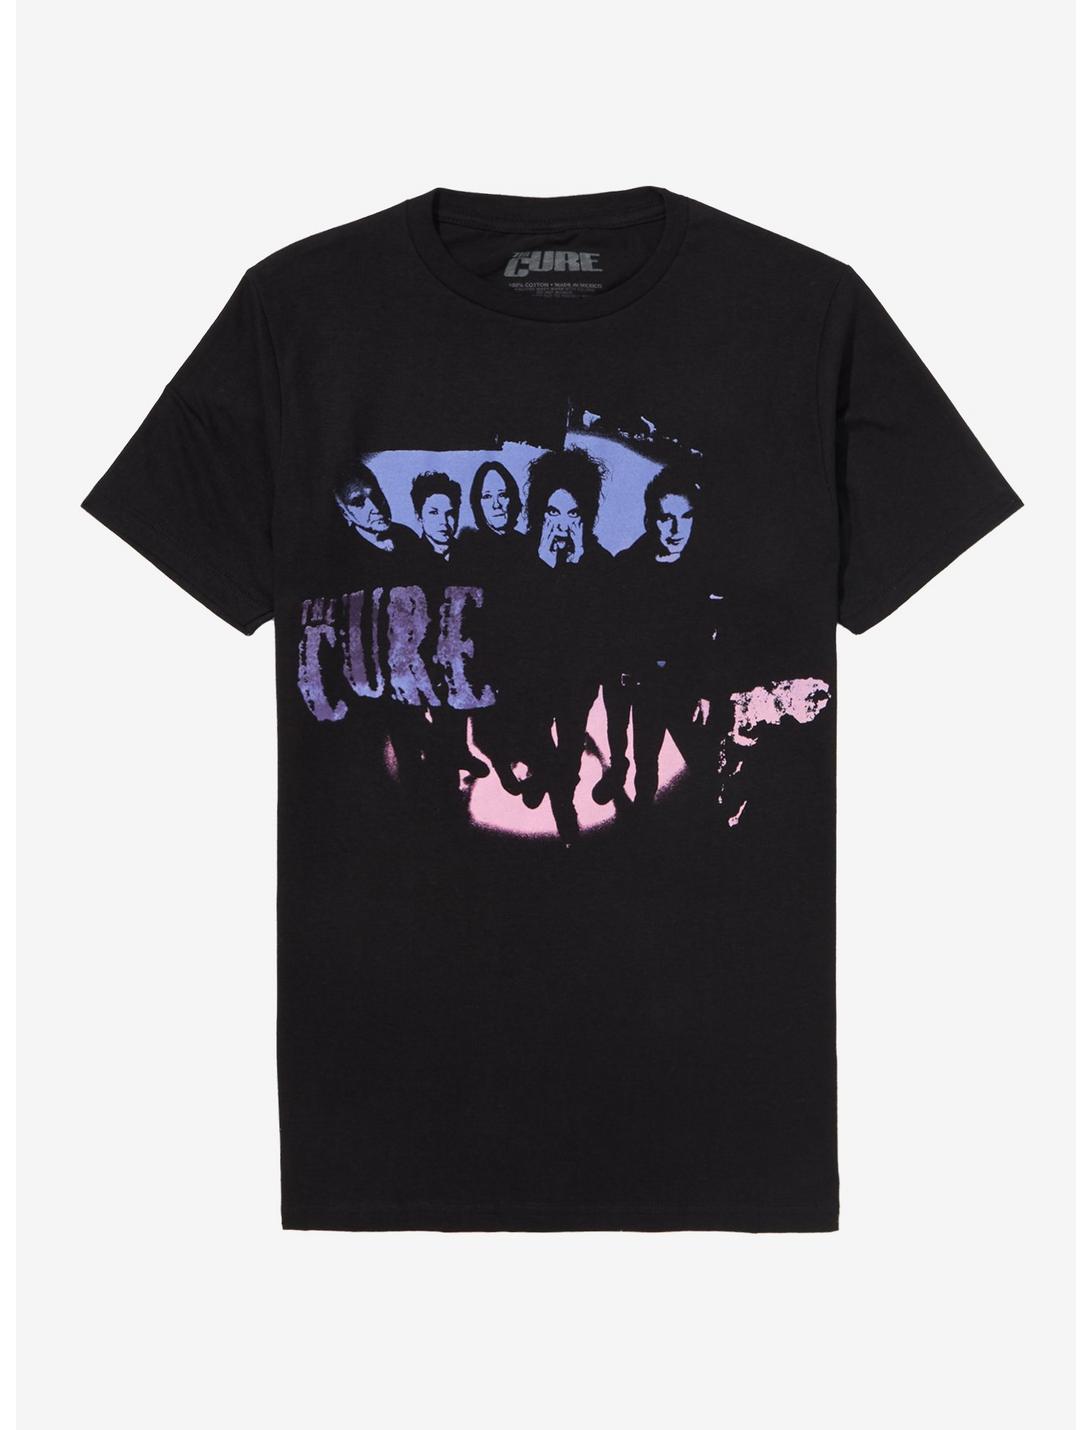 The Cure Group Photo Boyfriend Fit Girls T-Shirt | Hot Topic